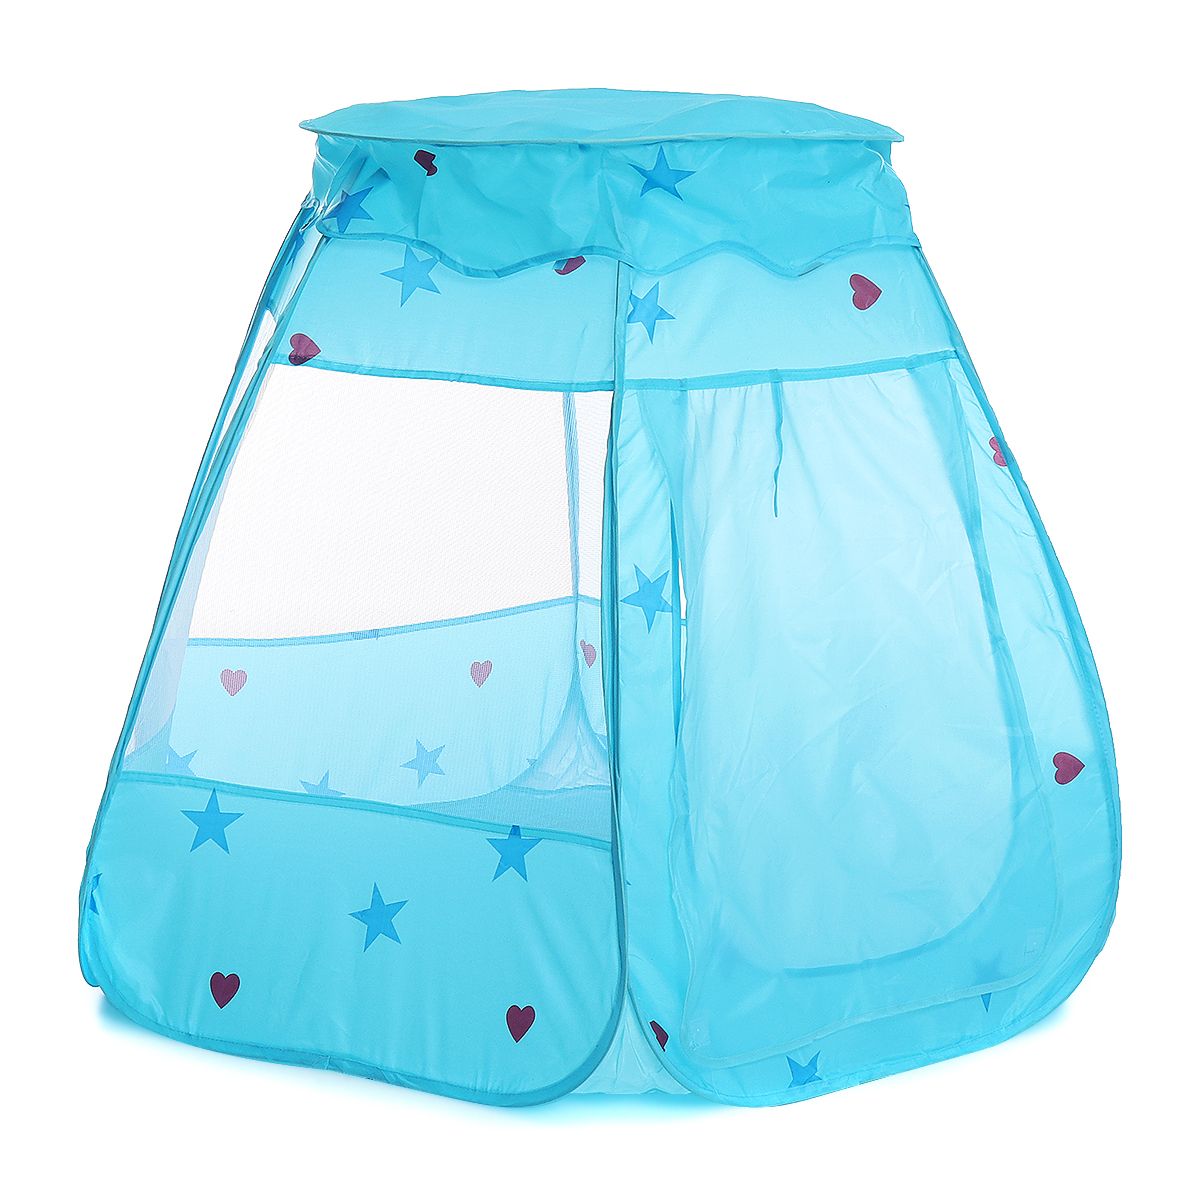 Blue--Pink-Children-Baby-Tent-Ocean-Ball-Pit-Pool-Play-House-Kid-Game-Toy-1640383